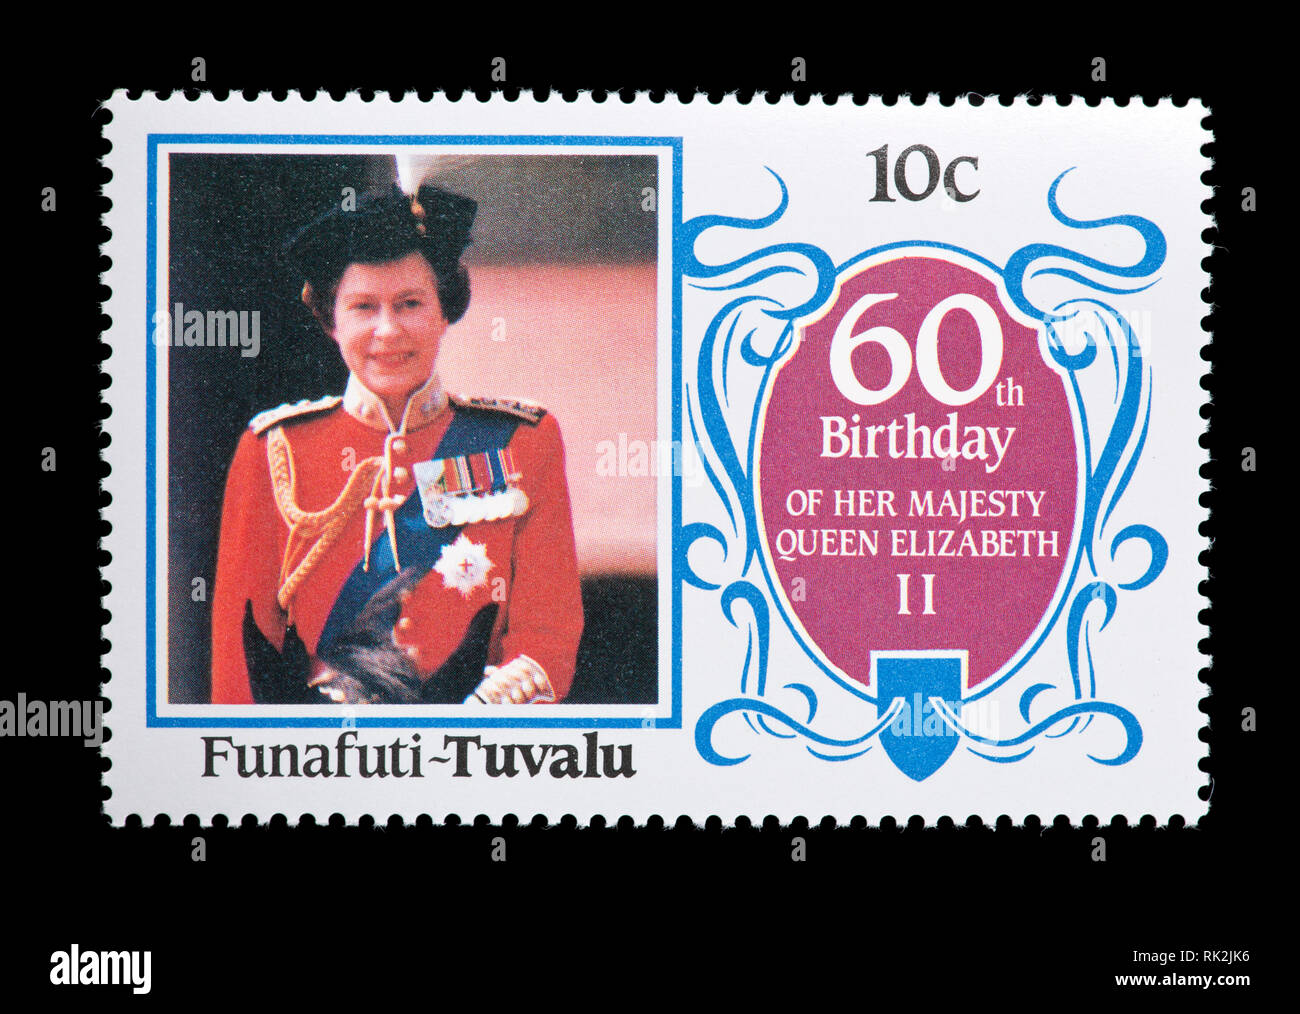 Postage stamp from Funafuti, Tuvalu depicting Queen Elizabeth II of Great Britain, on her 50th birthday. Stock Photo